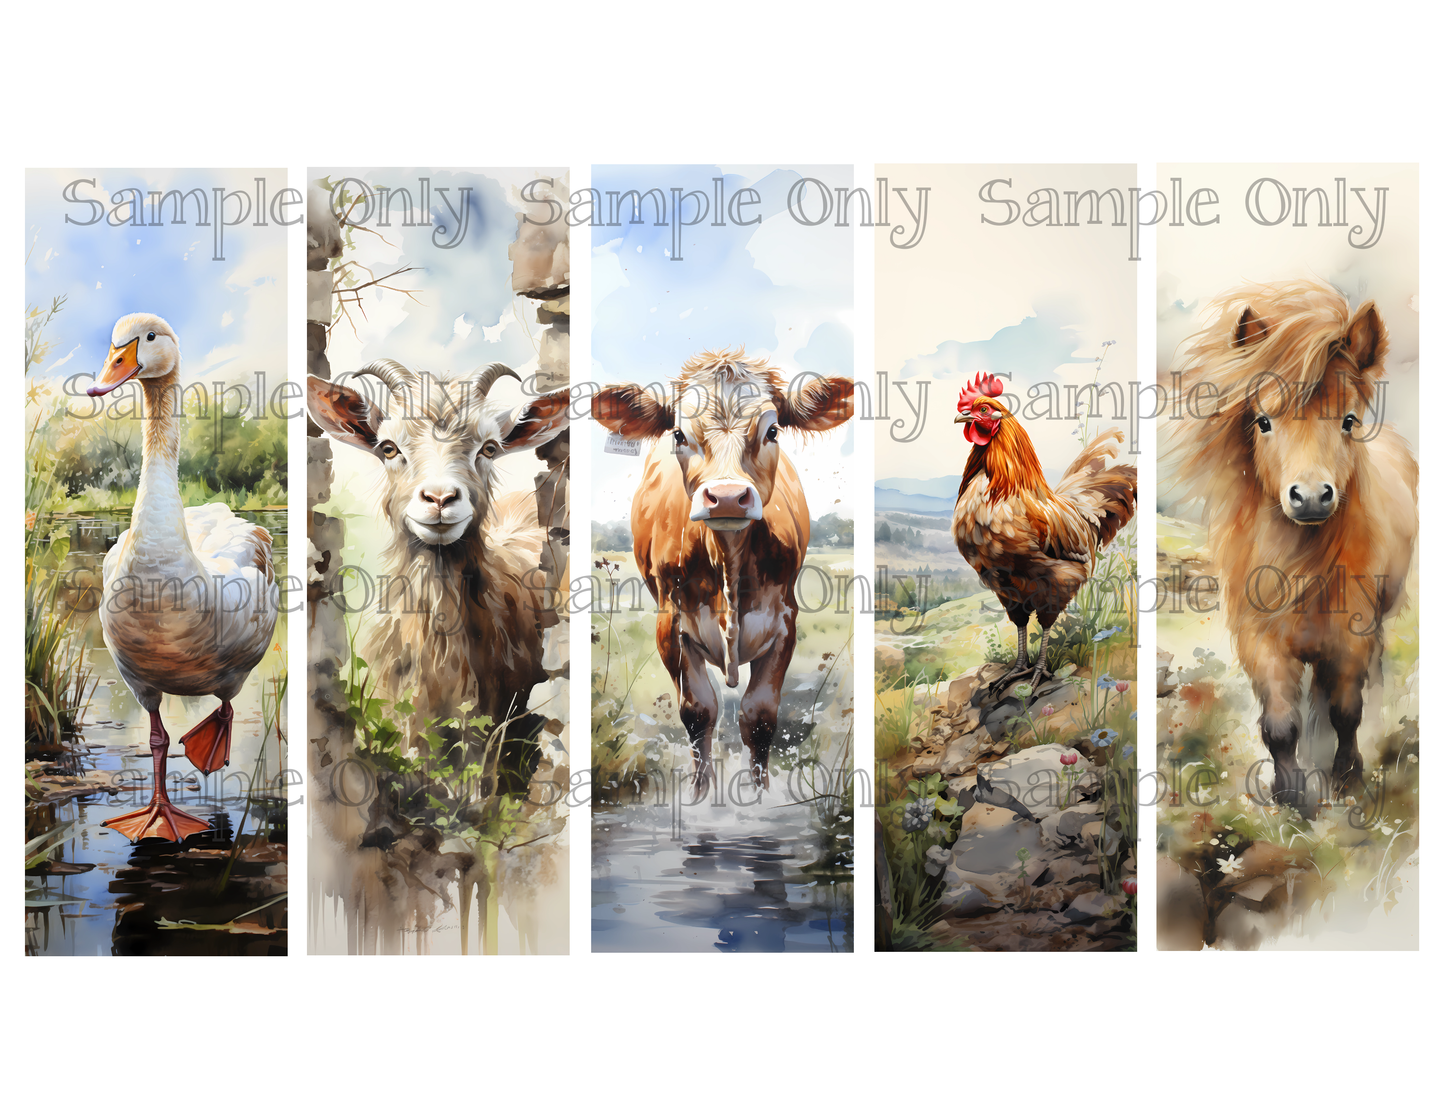 Farm Animals Bookmark Set 03 Printed Water Soluble Image Transfer Sheet For Polymer Clay